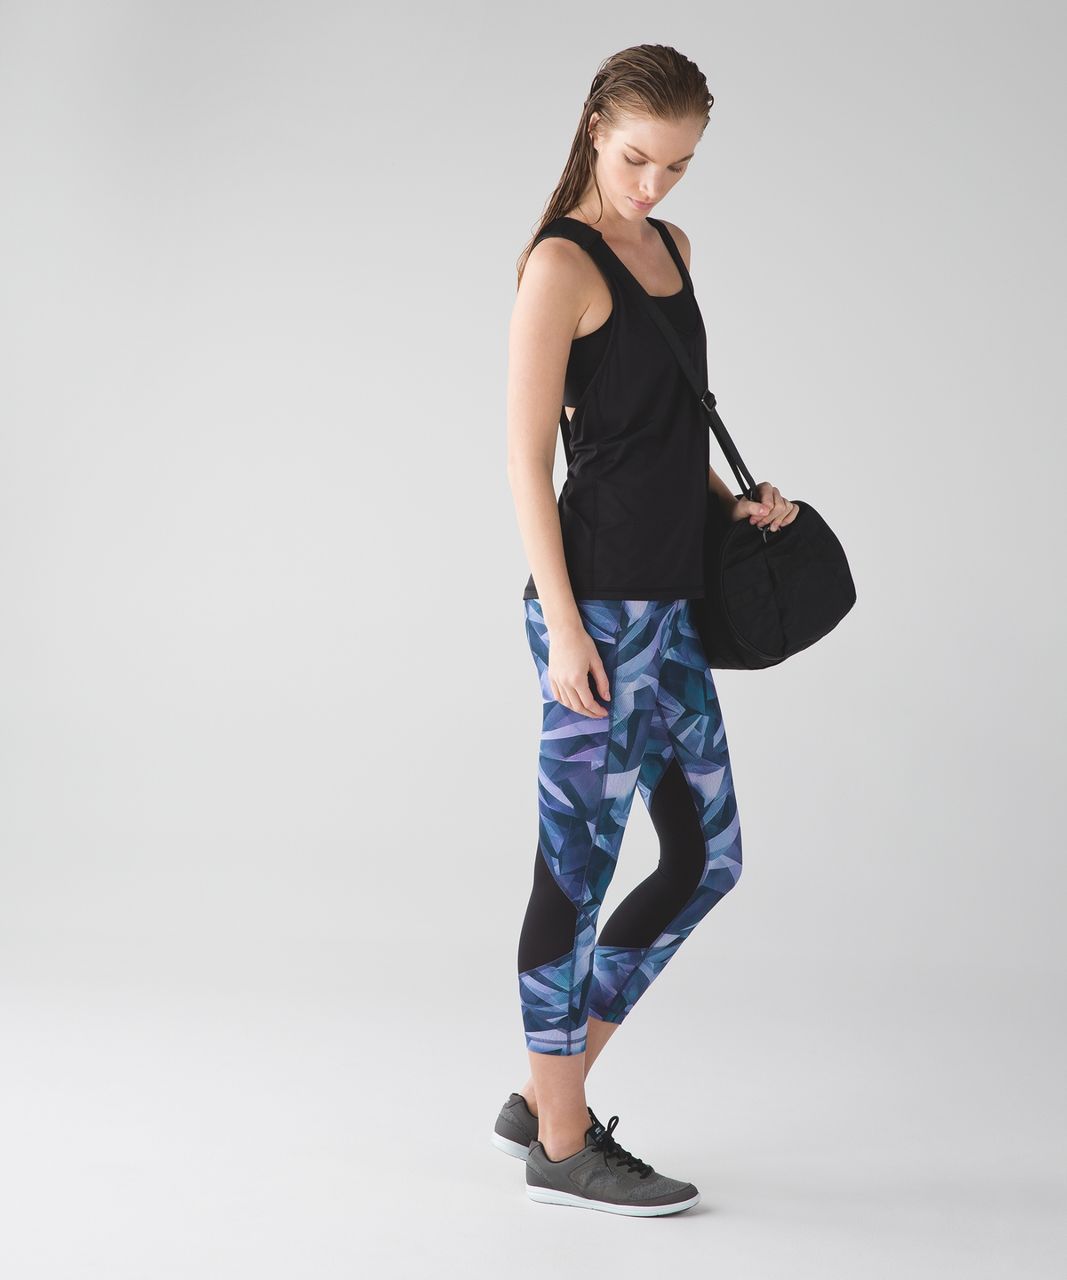 Lululemon Pace Rival Crop *Full-On Luxtreme - Pretty Prism Multi / Black